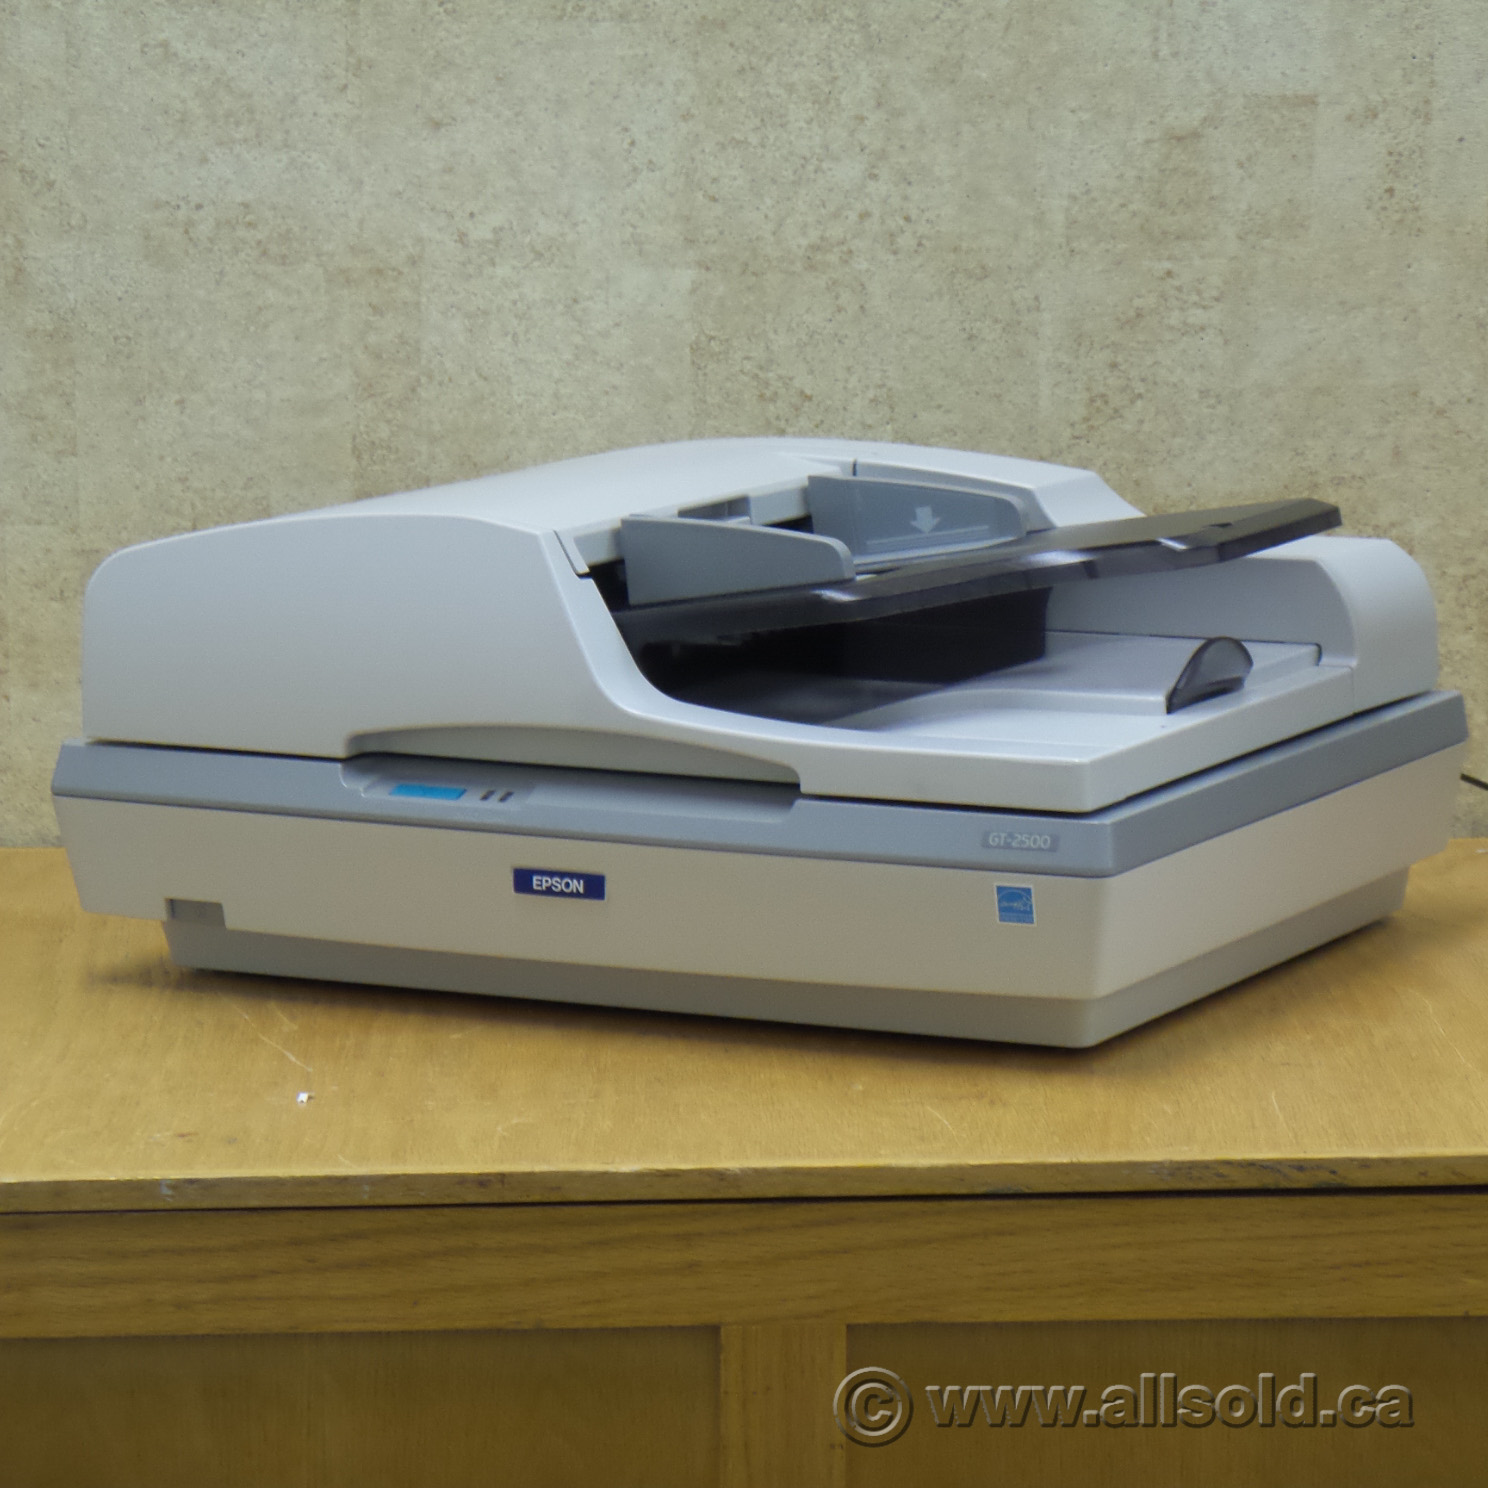 Epson Document Scanner w 50 Sheet Auto Document Feeder - Allsold.ca - Buy & Sell Used Office Furniture Calgary